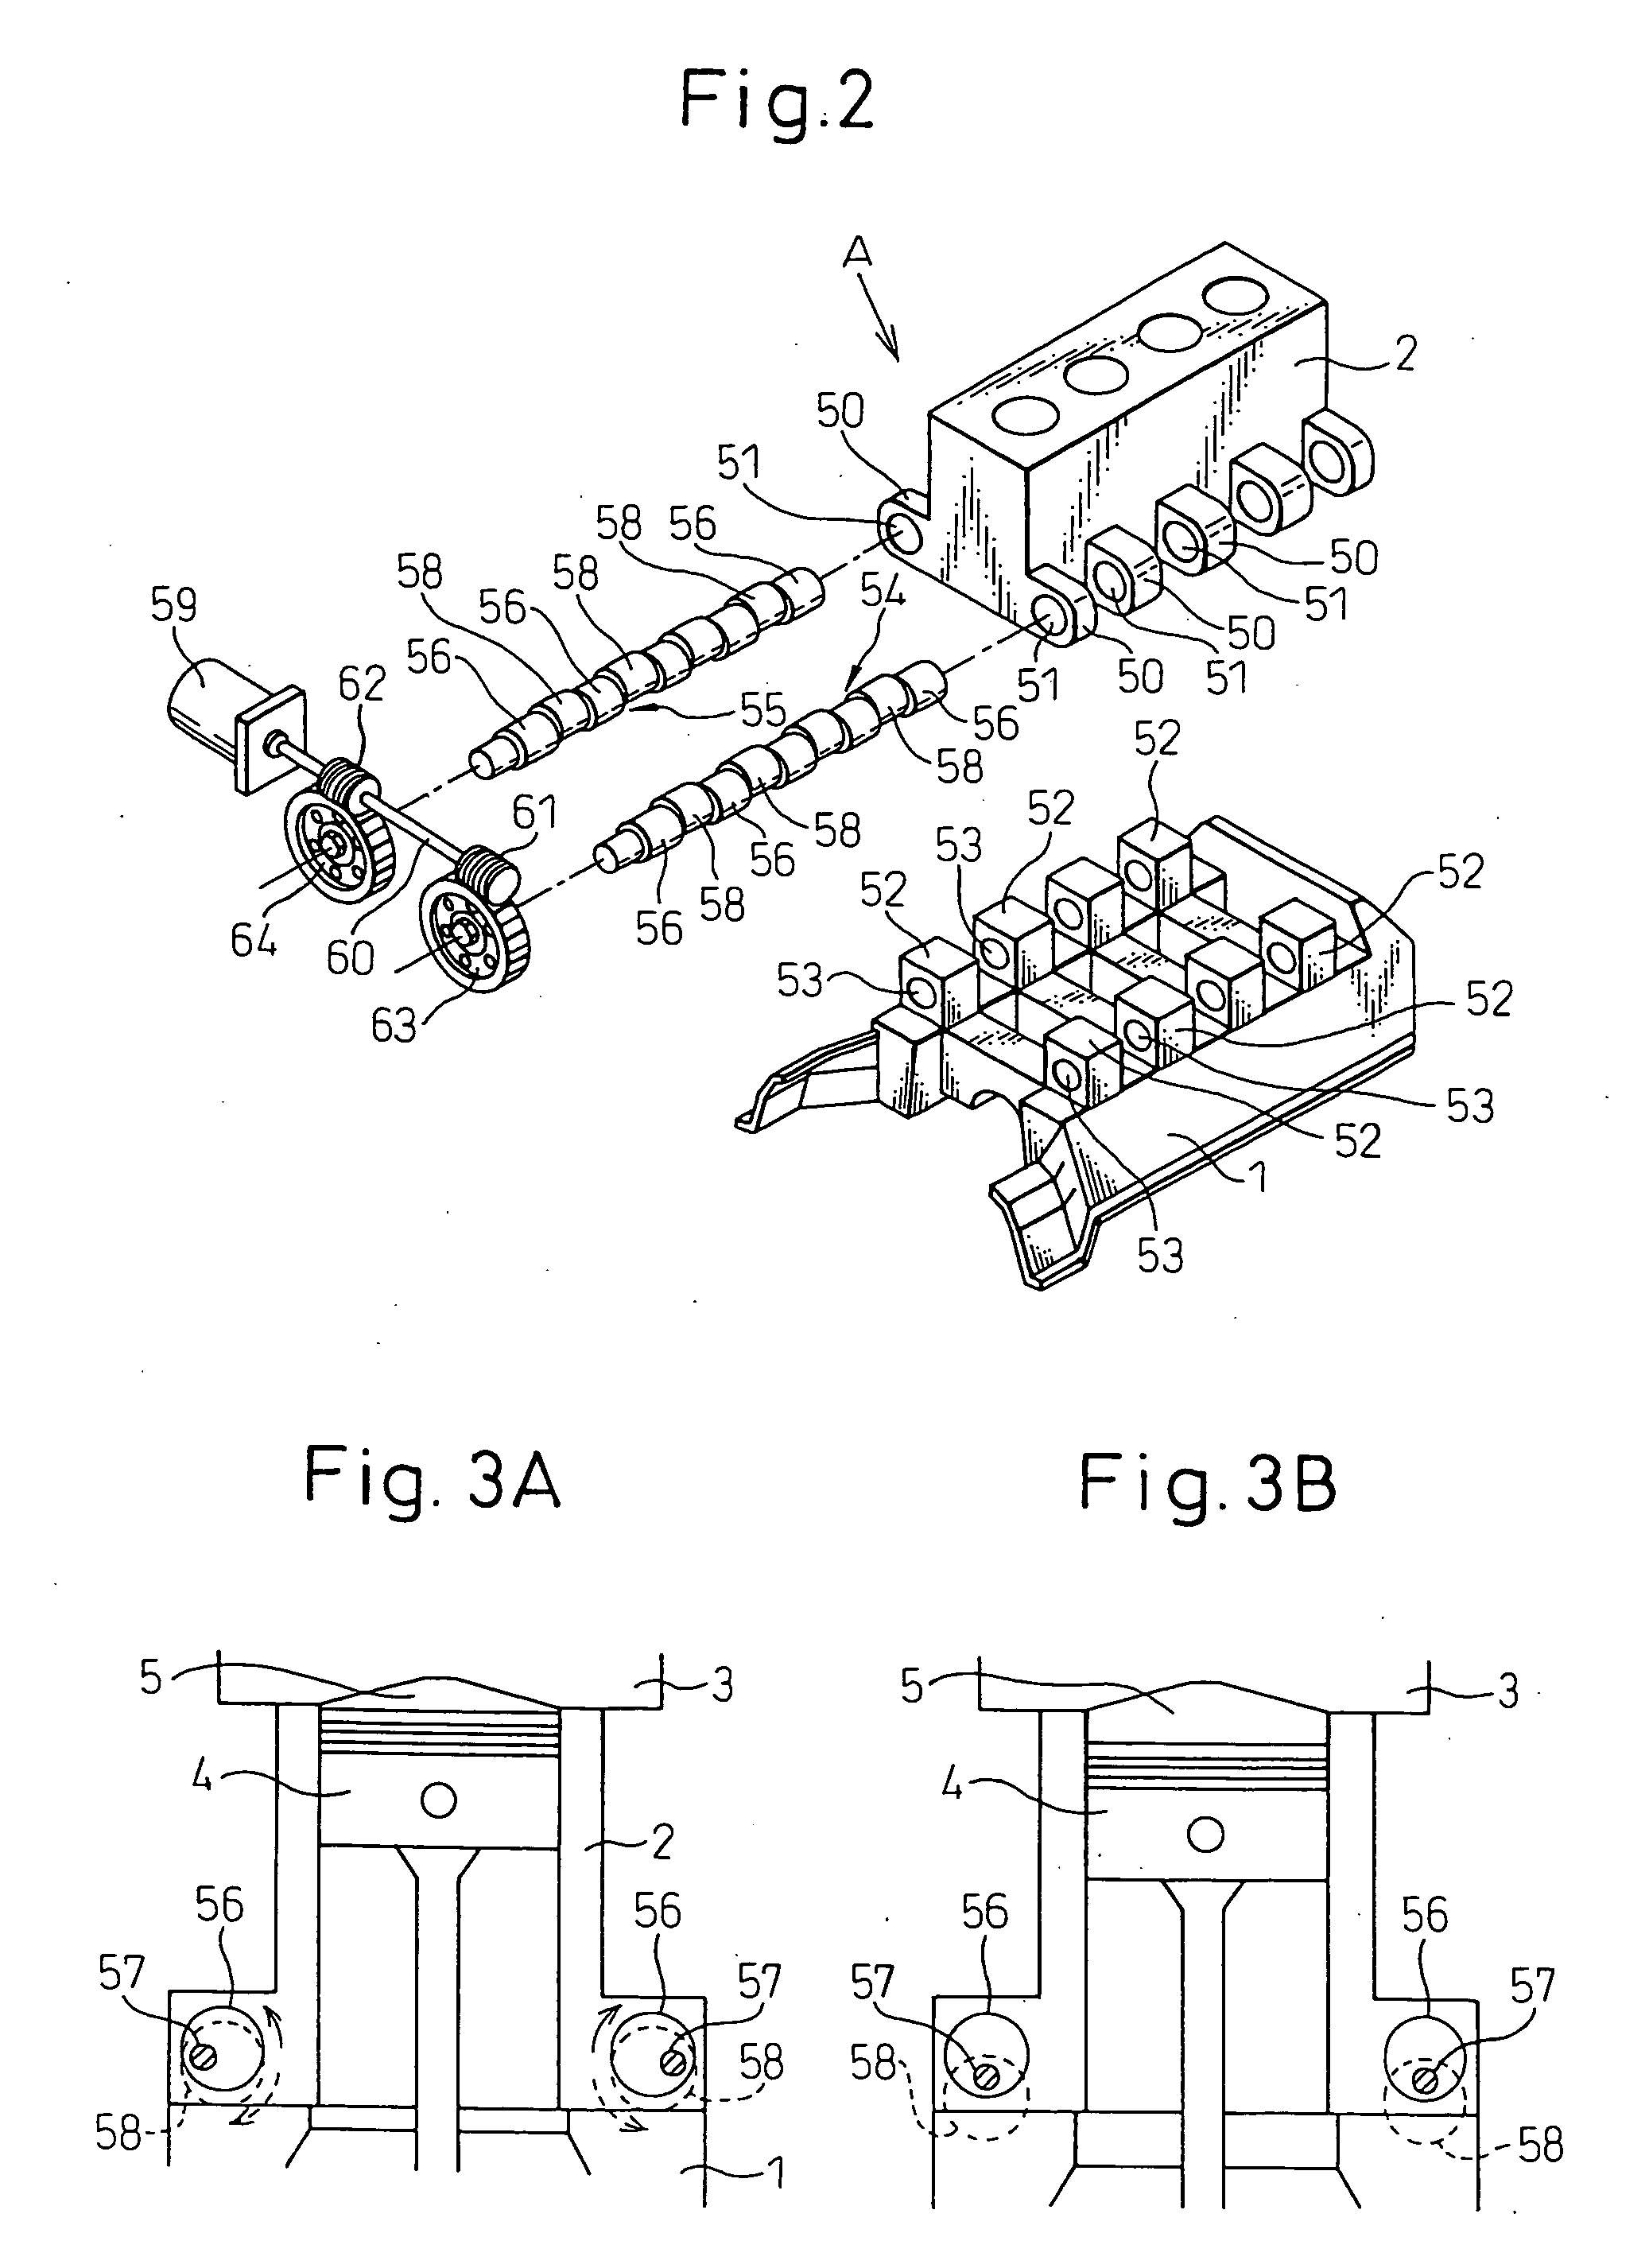 Spark Ignition Type Internal Combustion Engine